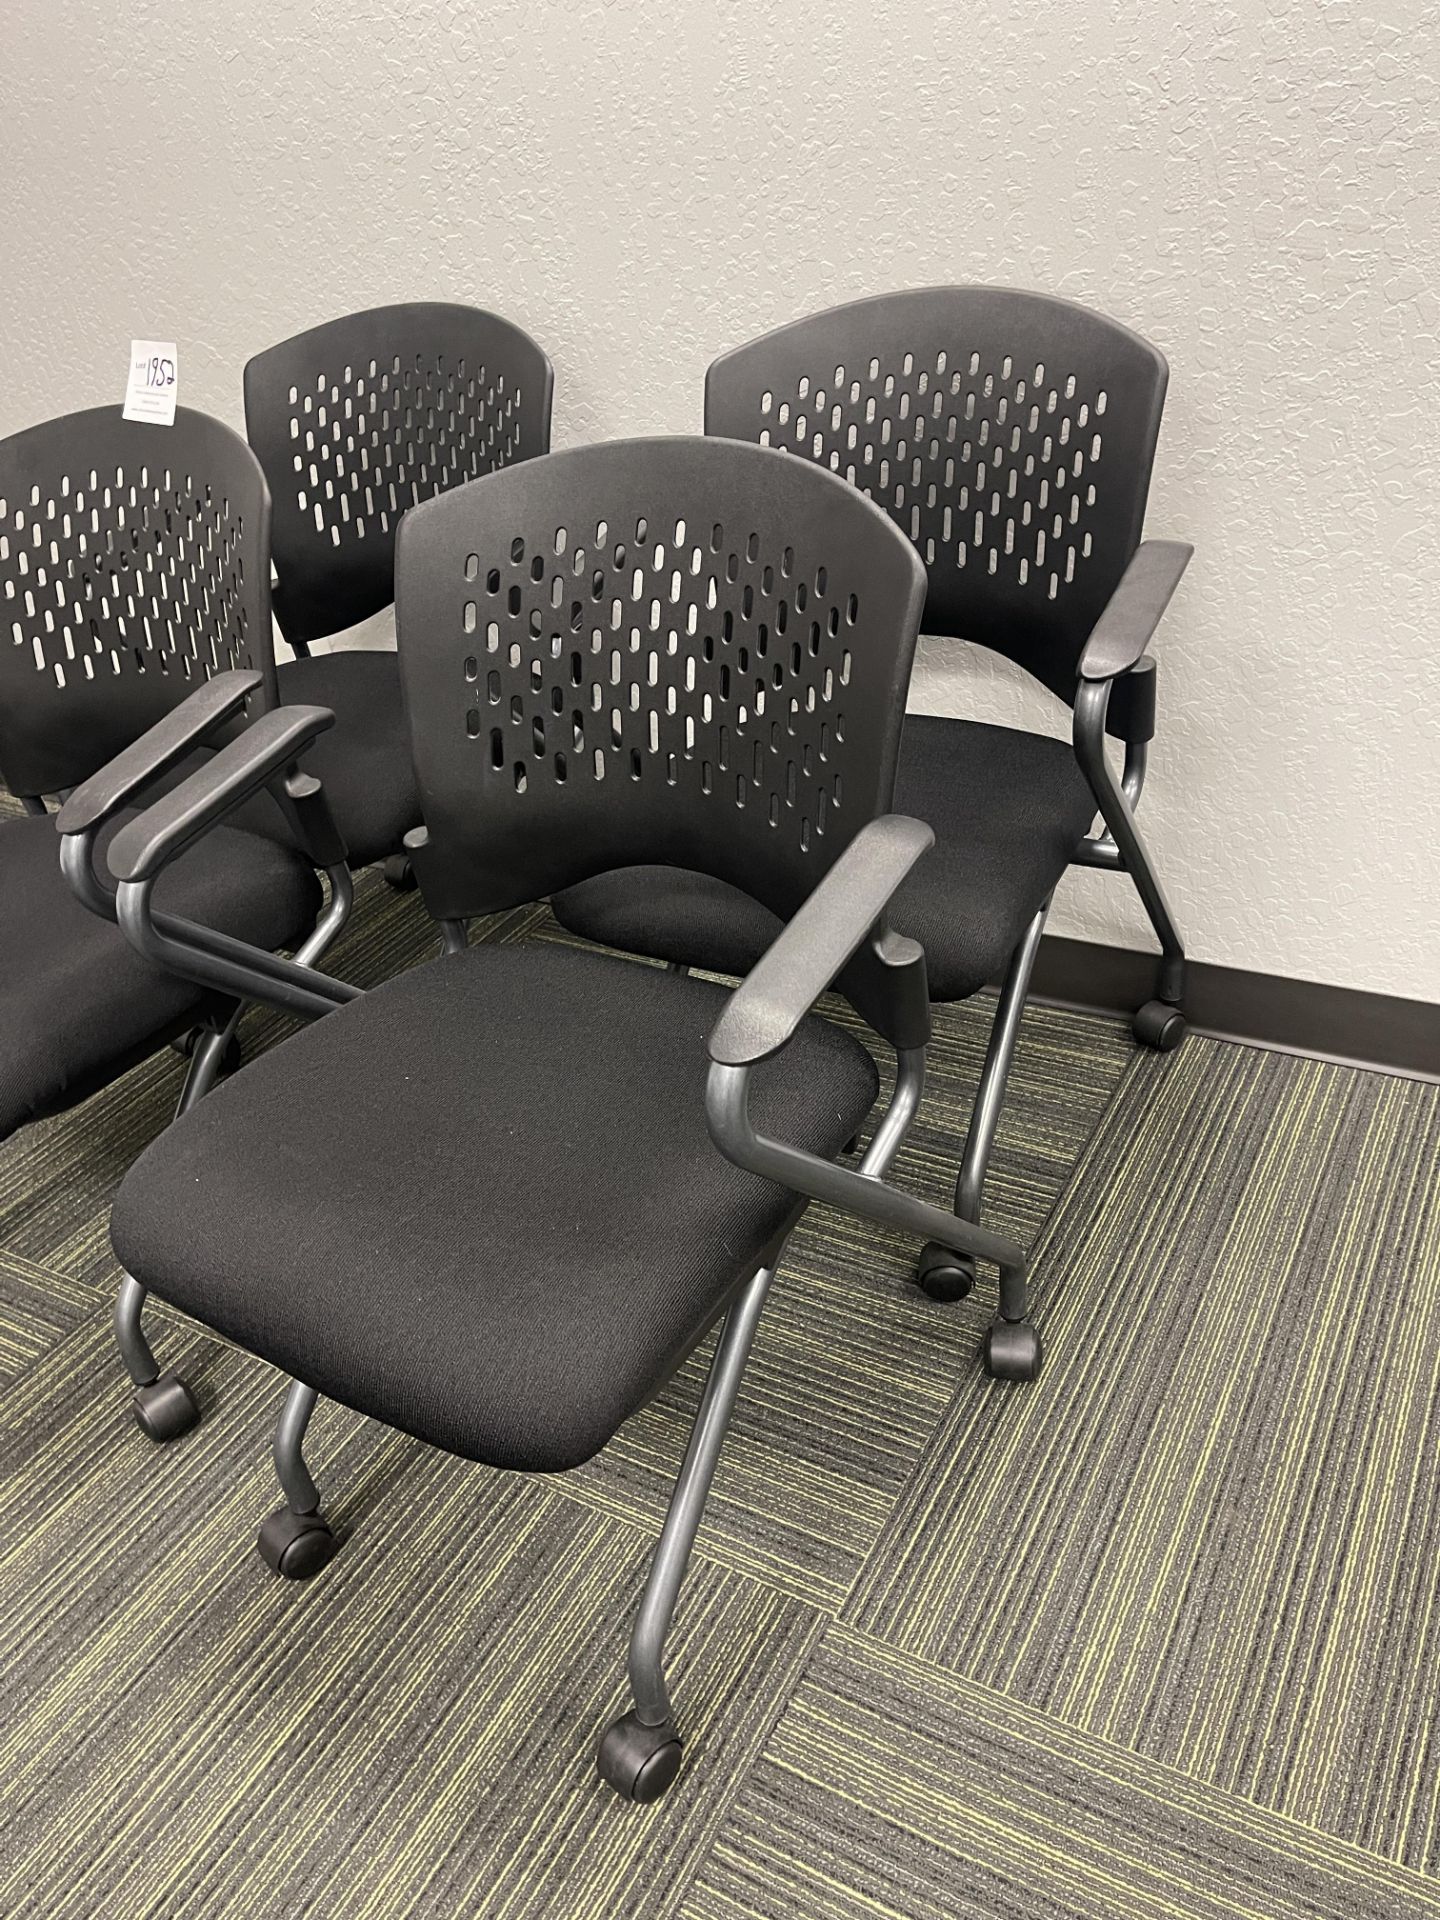 Four Black Desk Chairs with arms - Image 2 of 2